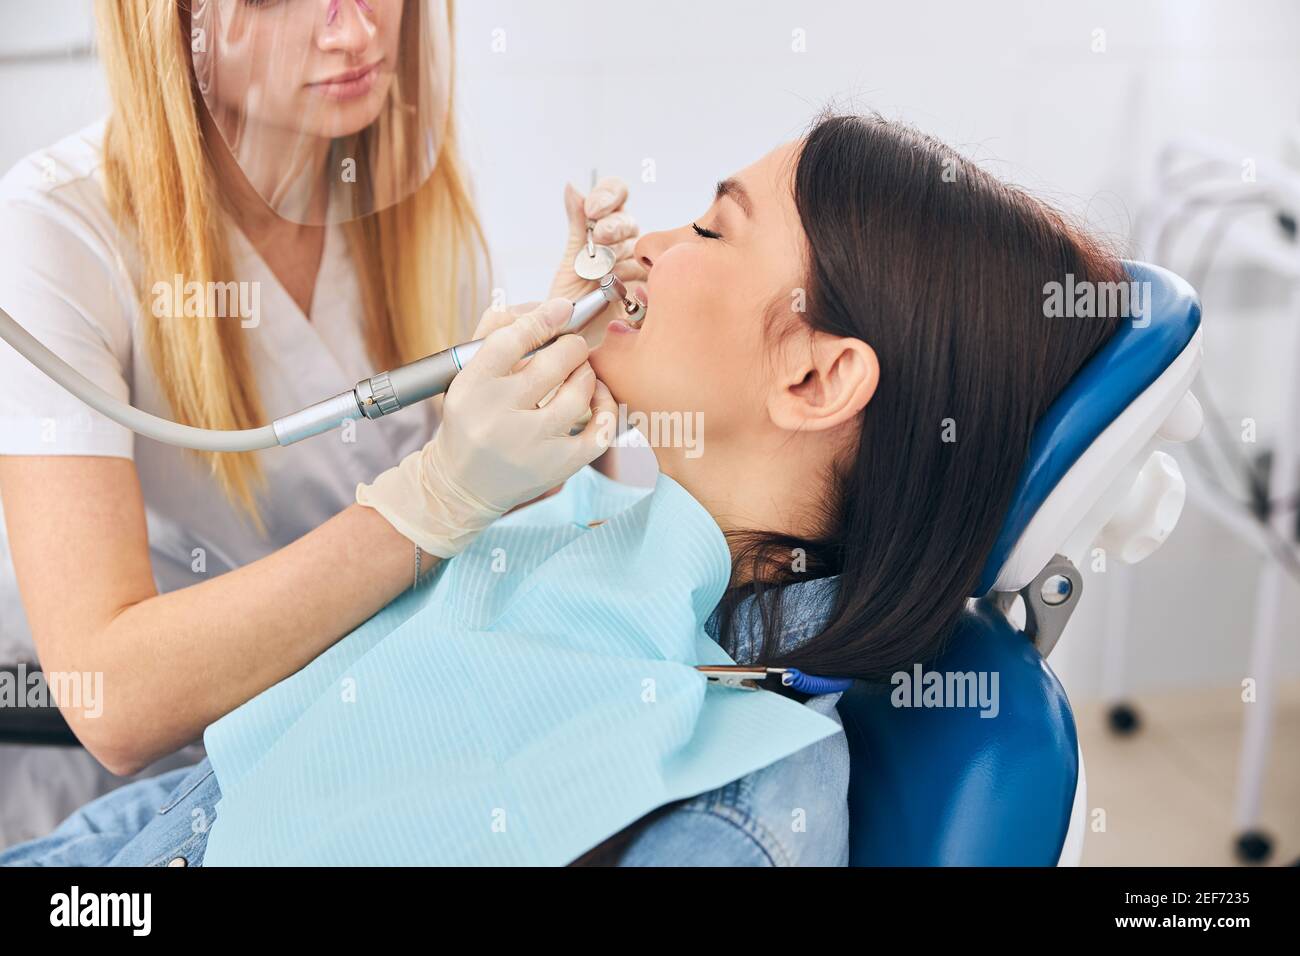 Young competent stomatologist doing dental care procedure Stock Photo